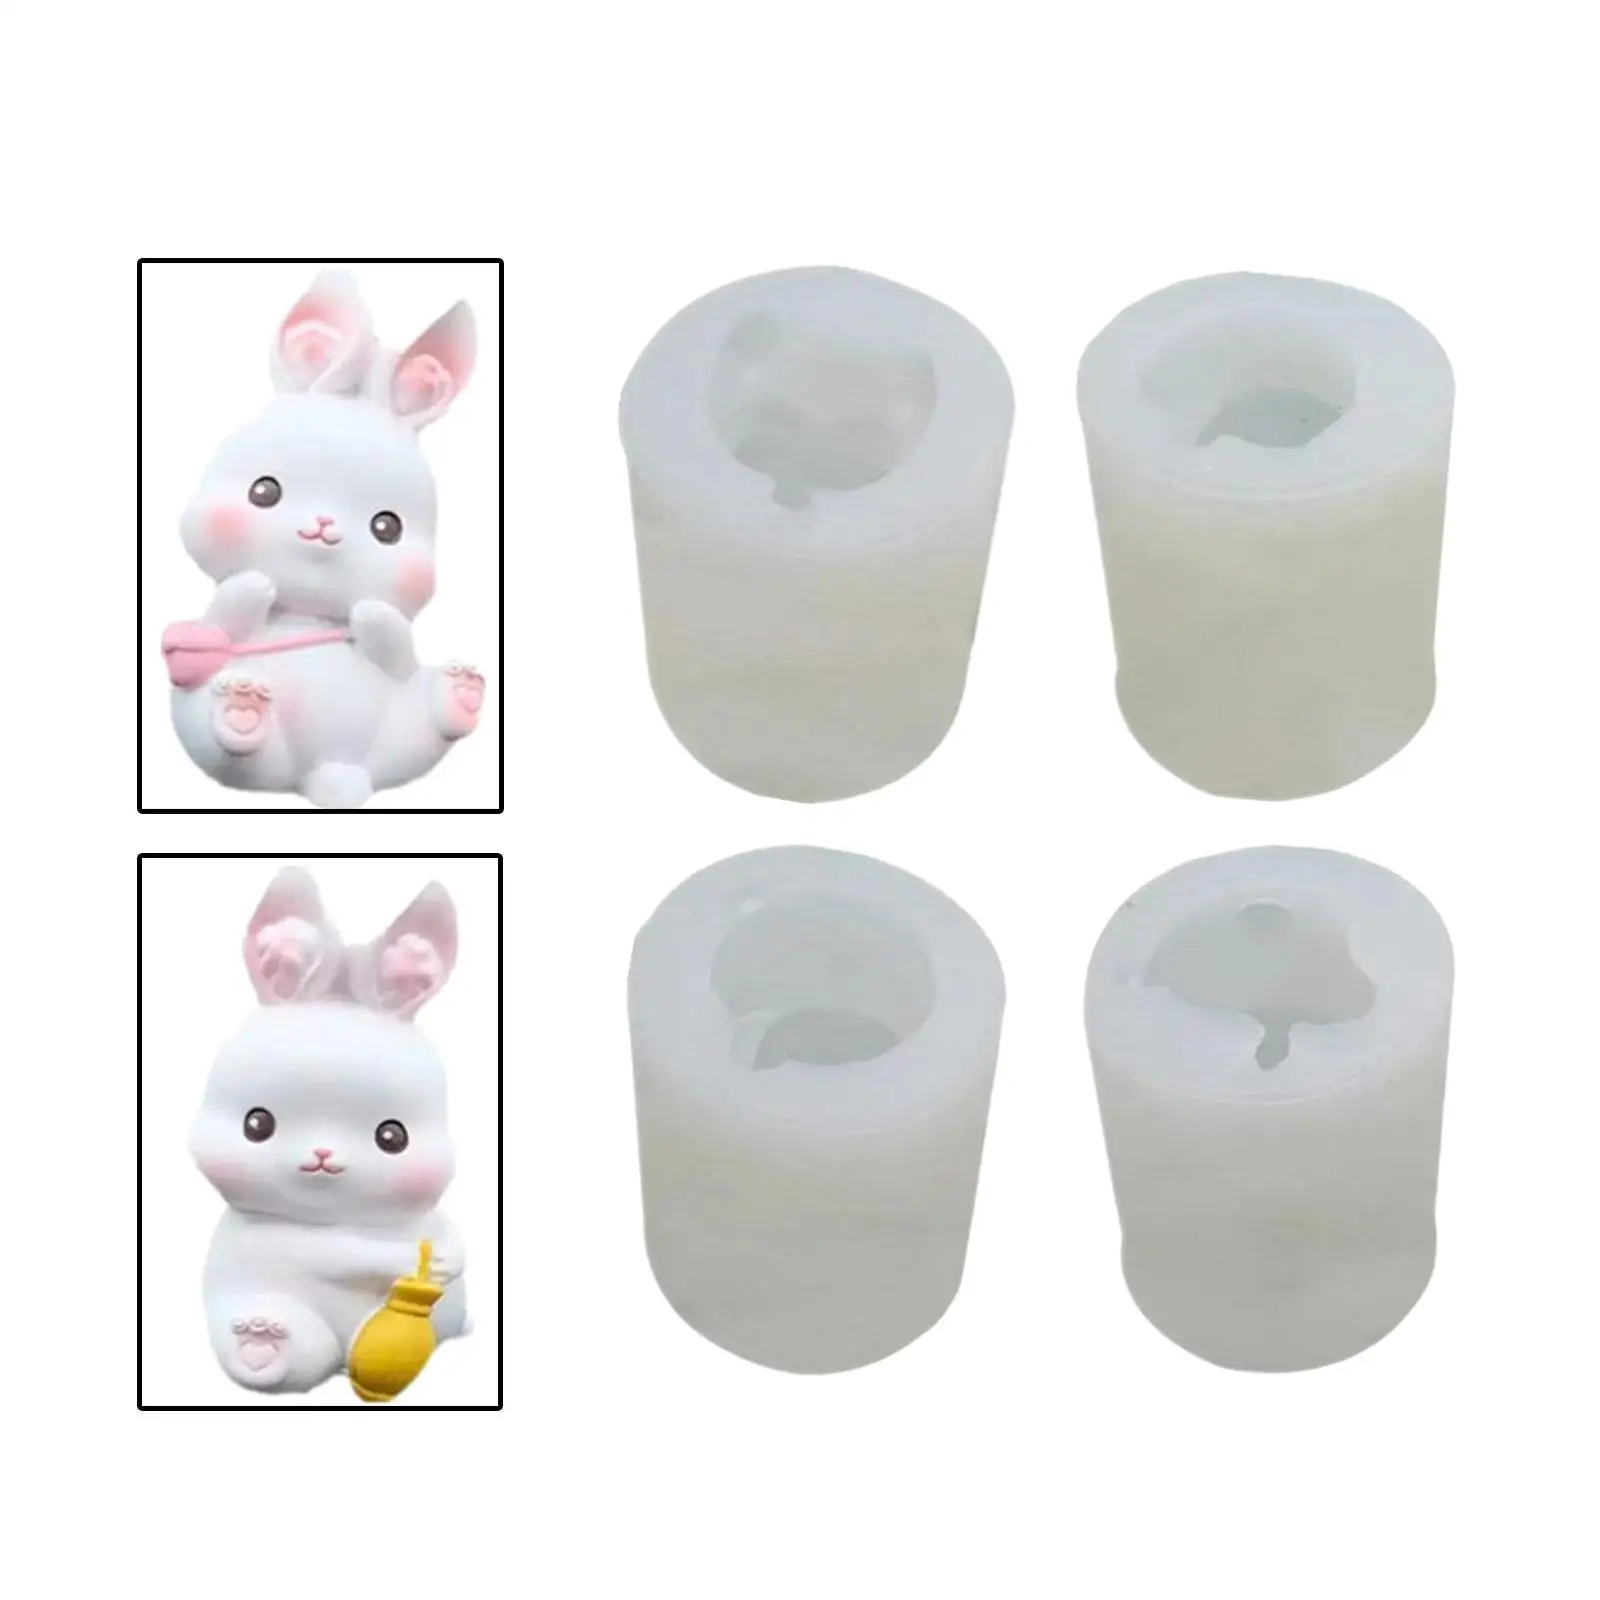 4 Pieces Bunny Chocolate Moulds Silicone Bunny Baking Mould Cake Moulds for Baking Party Pudding Cake Ice Cream